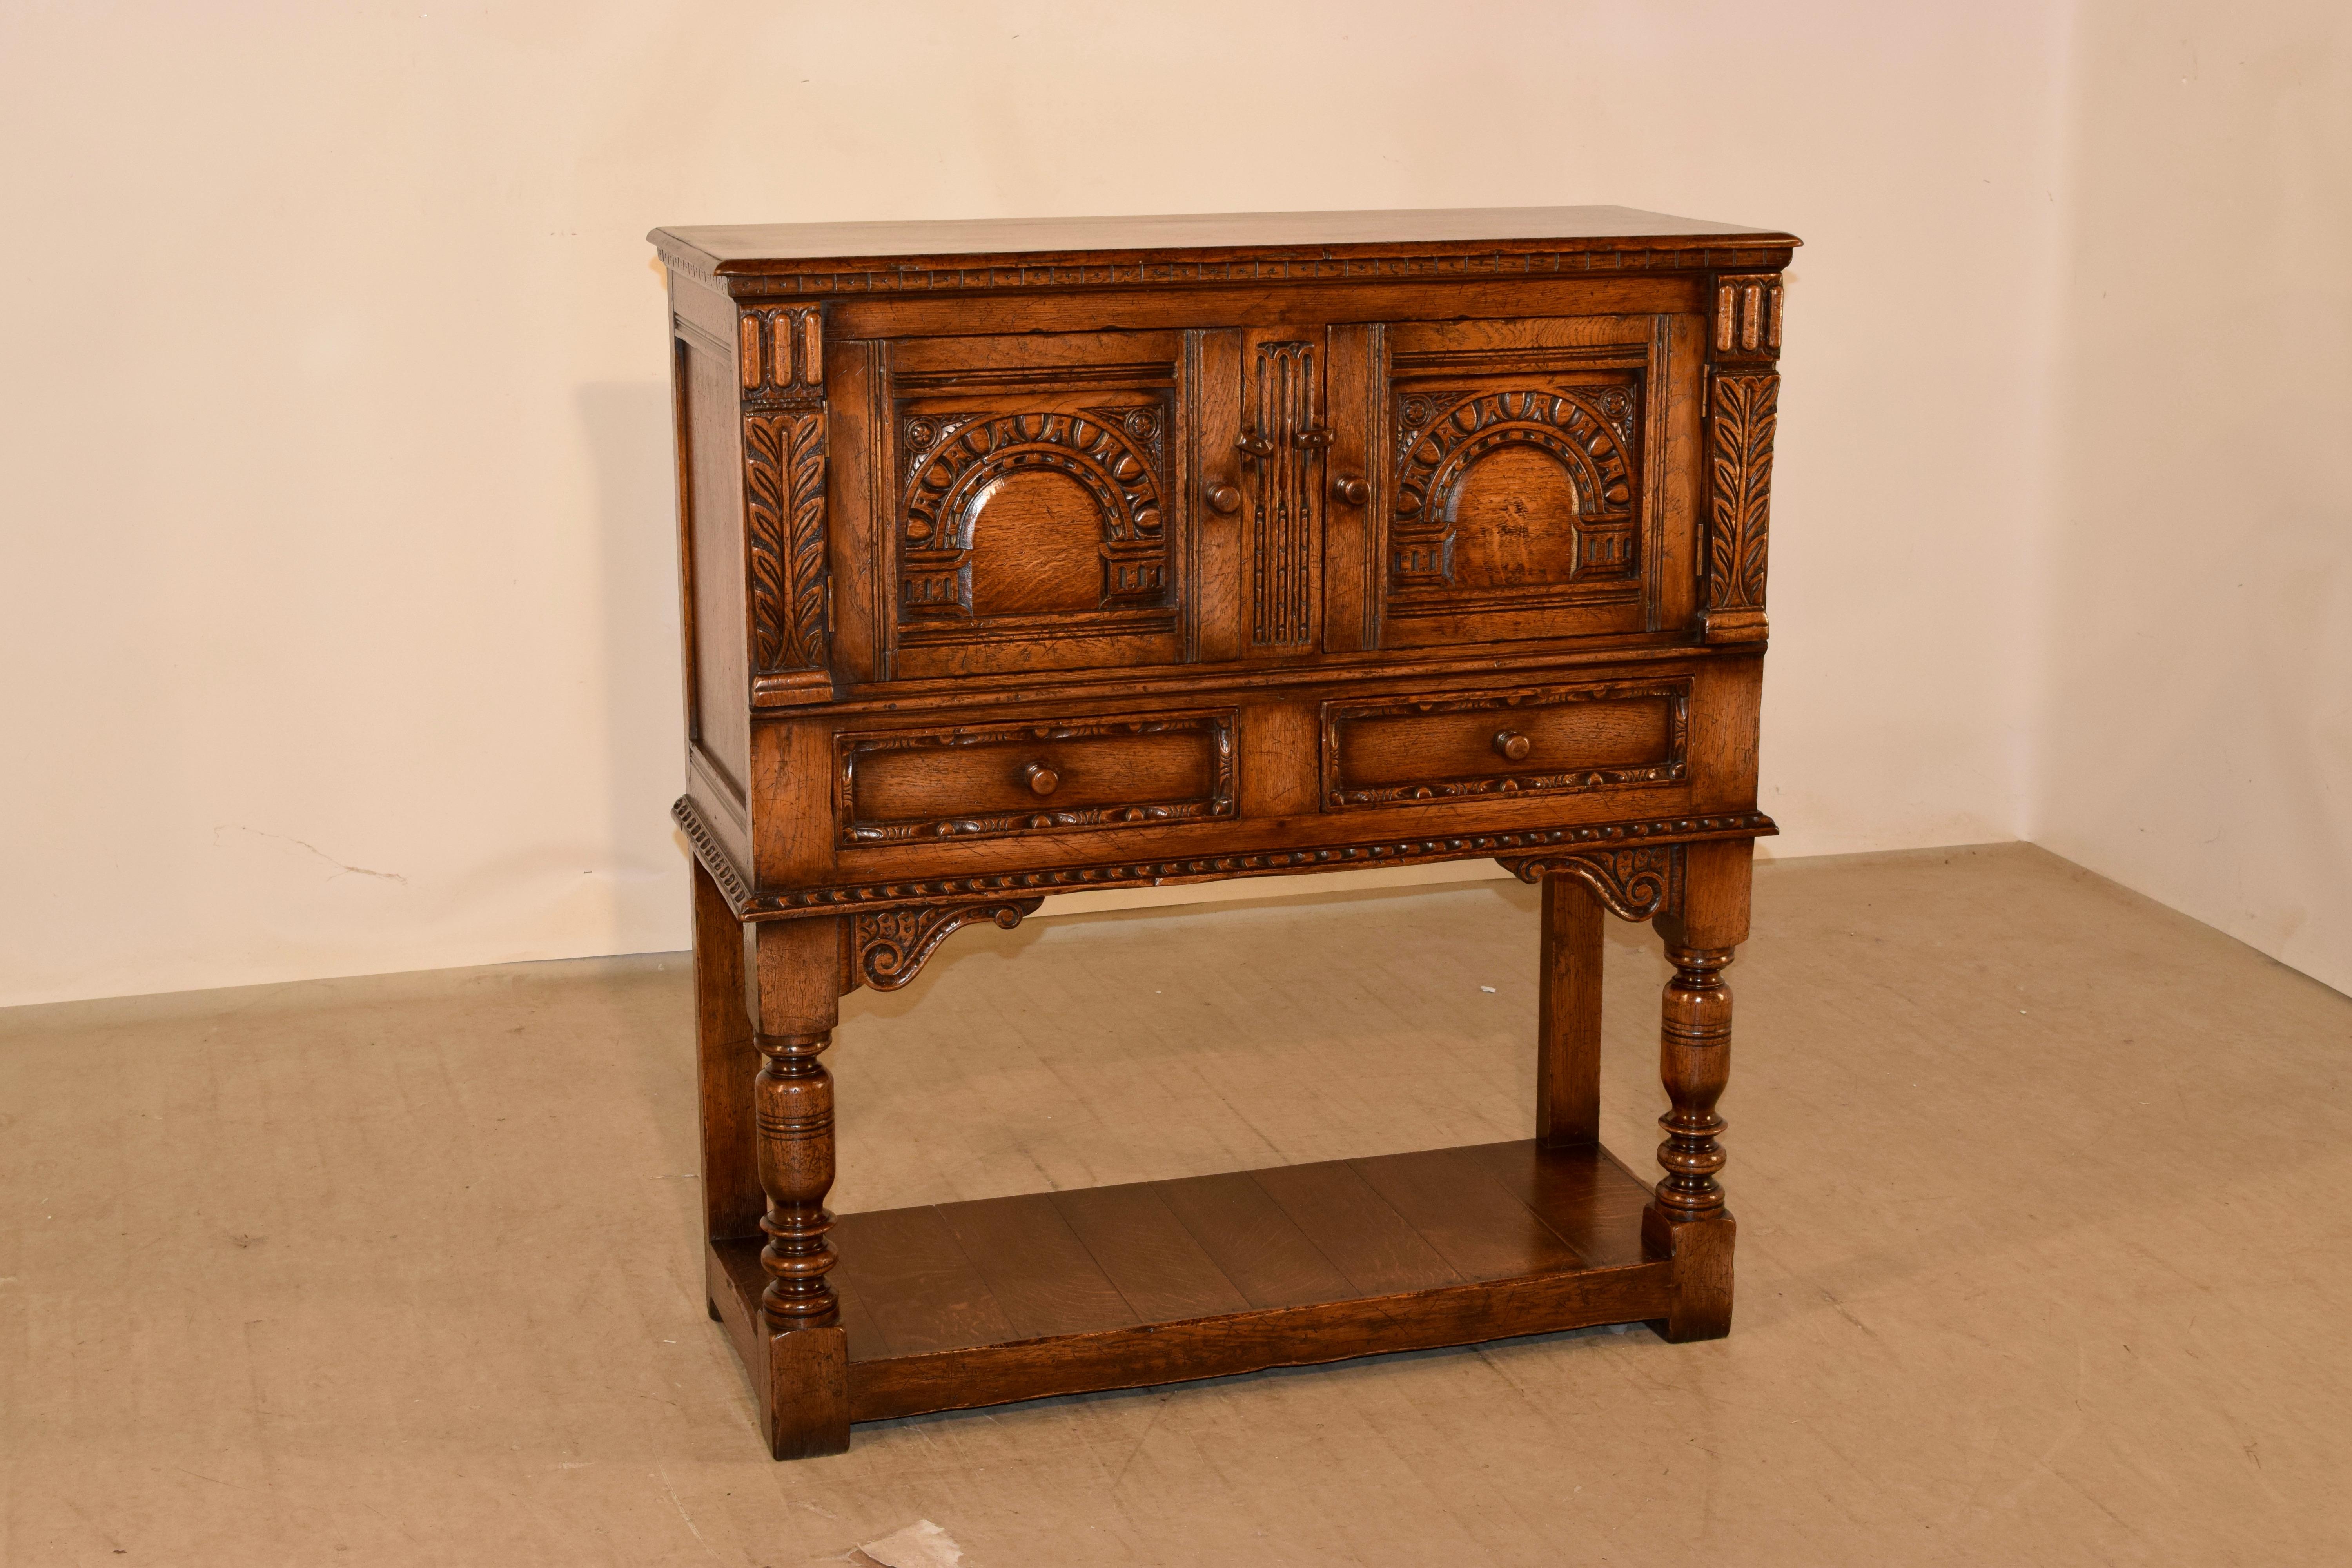 Late 19th century English oak server from the Ipswitch region of England. The top has a beveled edge over a molded edge, and follows down to paneled sides and two paneled doors in the front which open to reveal storage. There are two paneled drawers